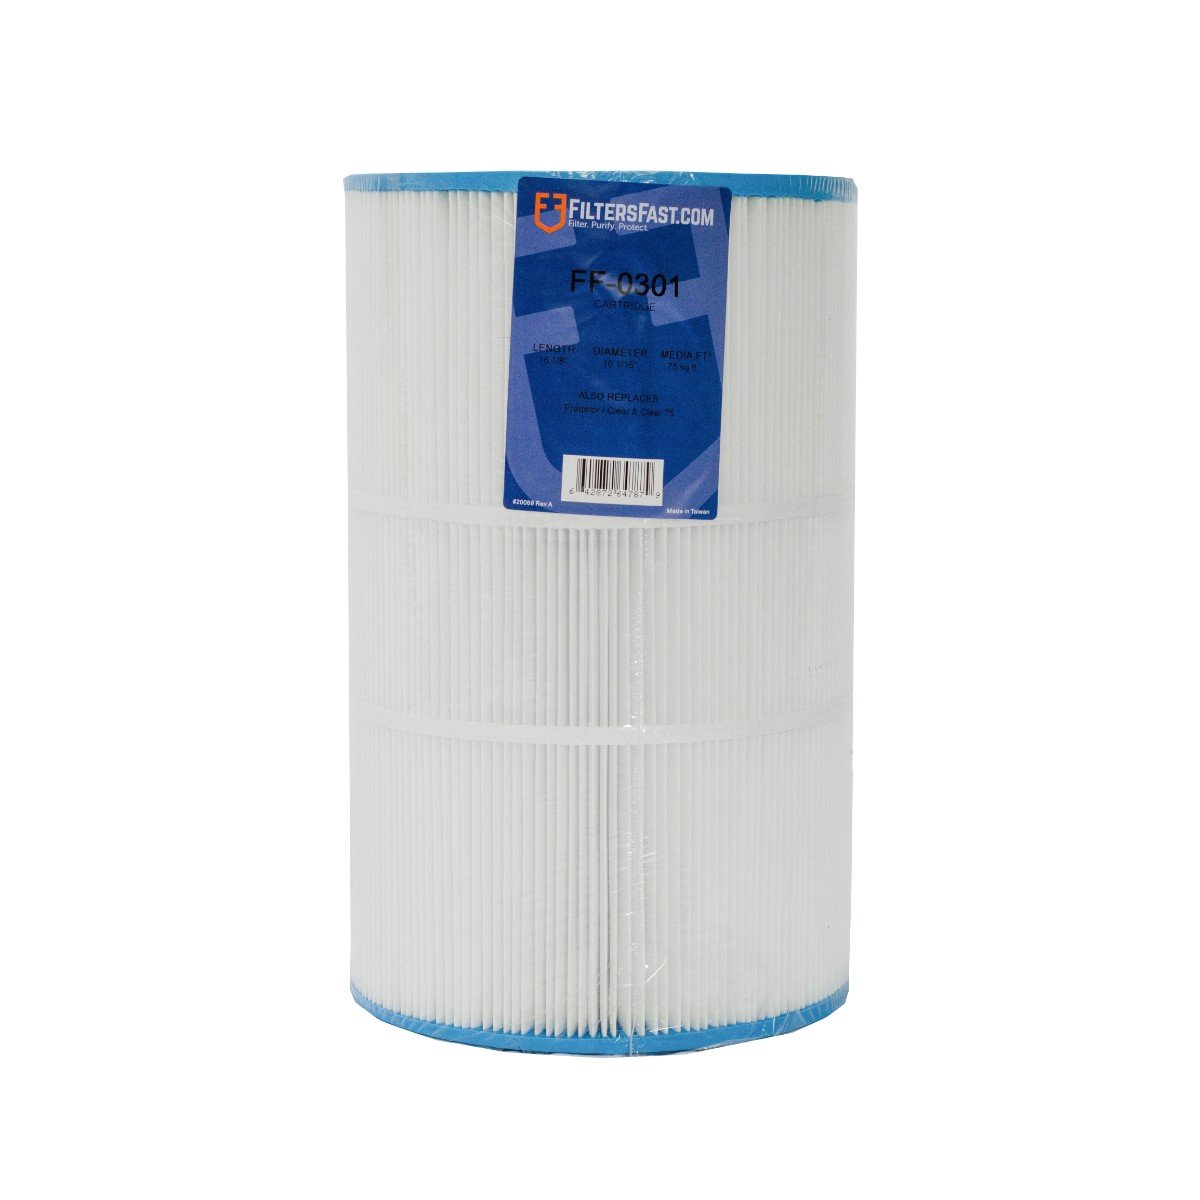 Filters Fast&reg; FF-0301 Replacement For Pentair R173214